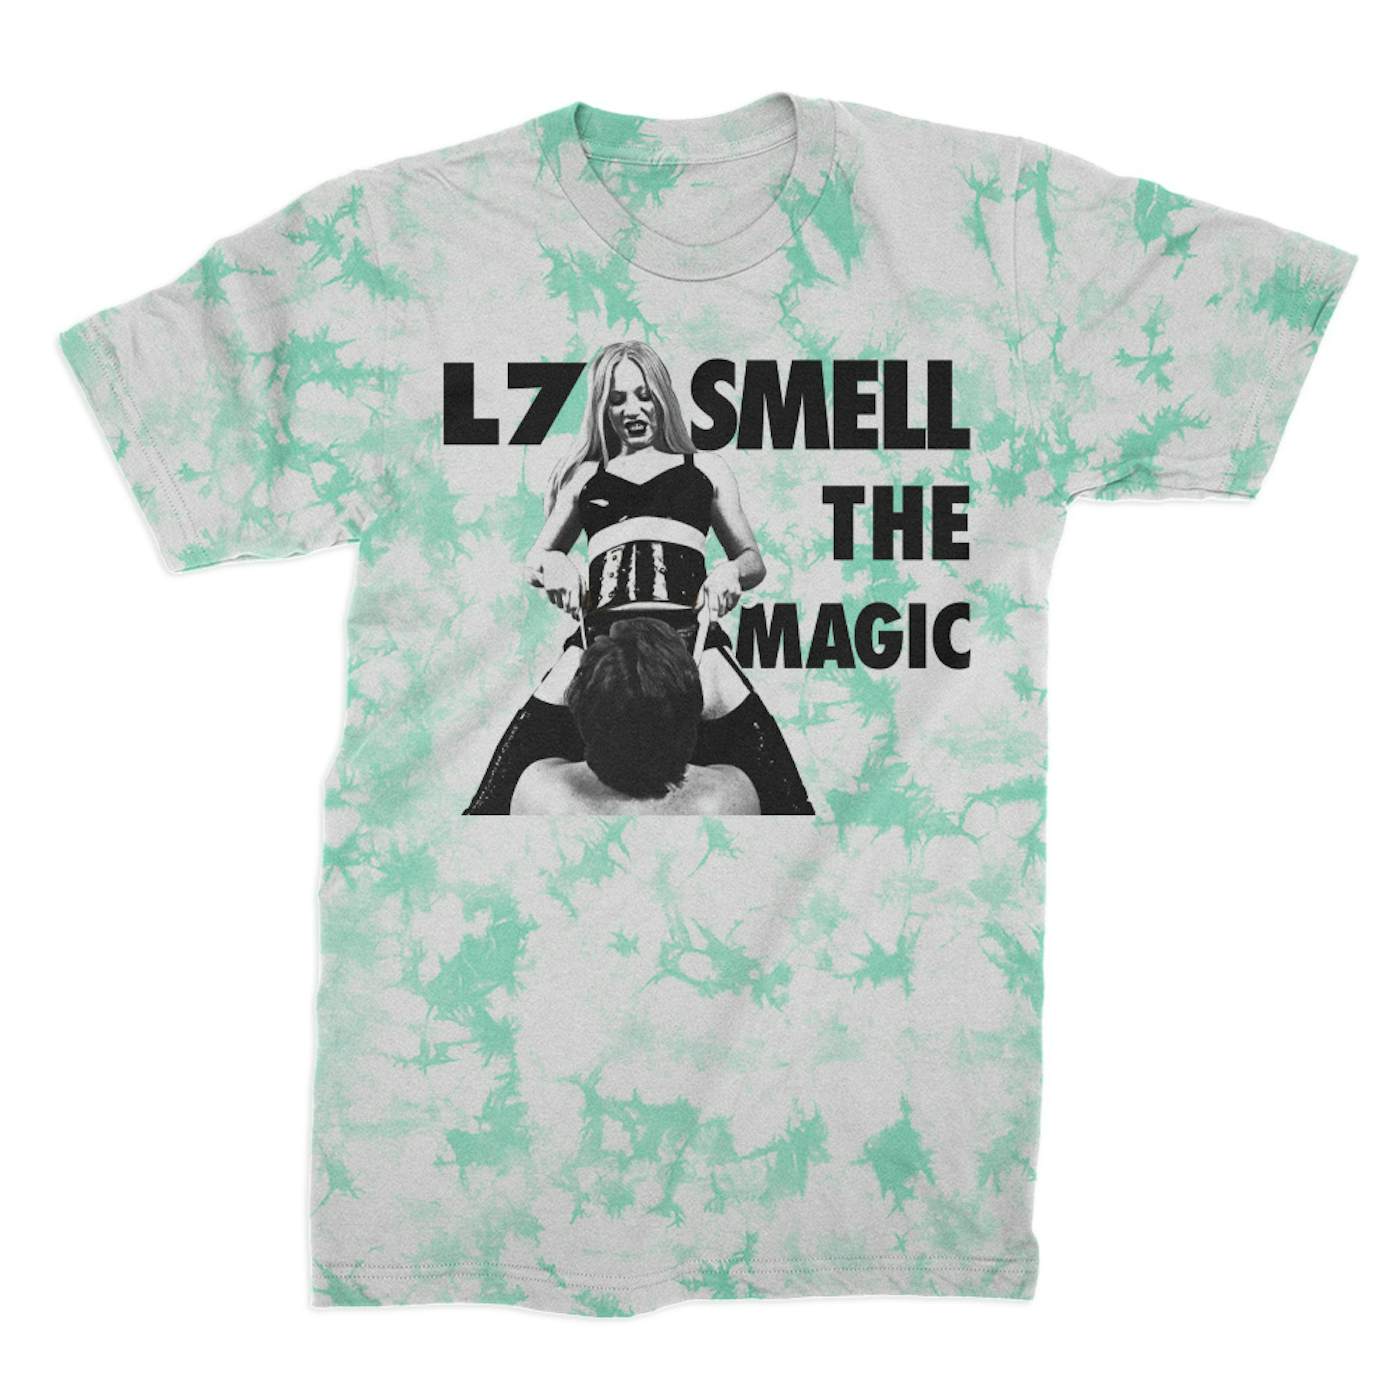 L7 Smell The Magic Limited Crystal Dye Tee (White/Min